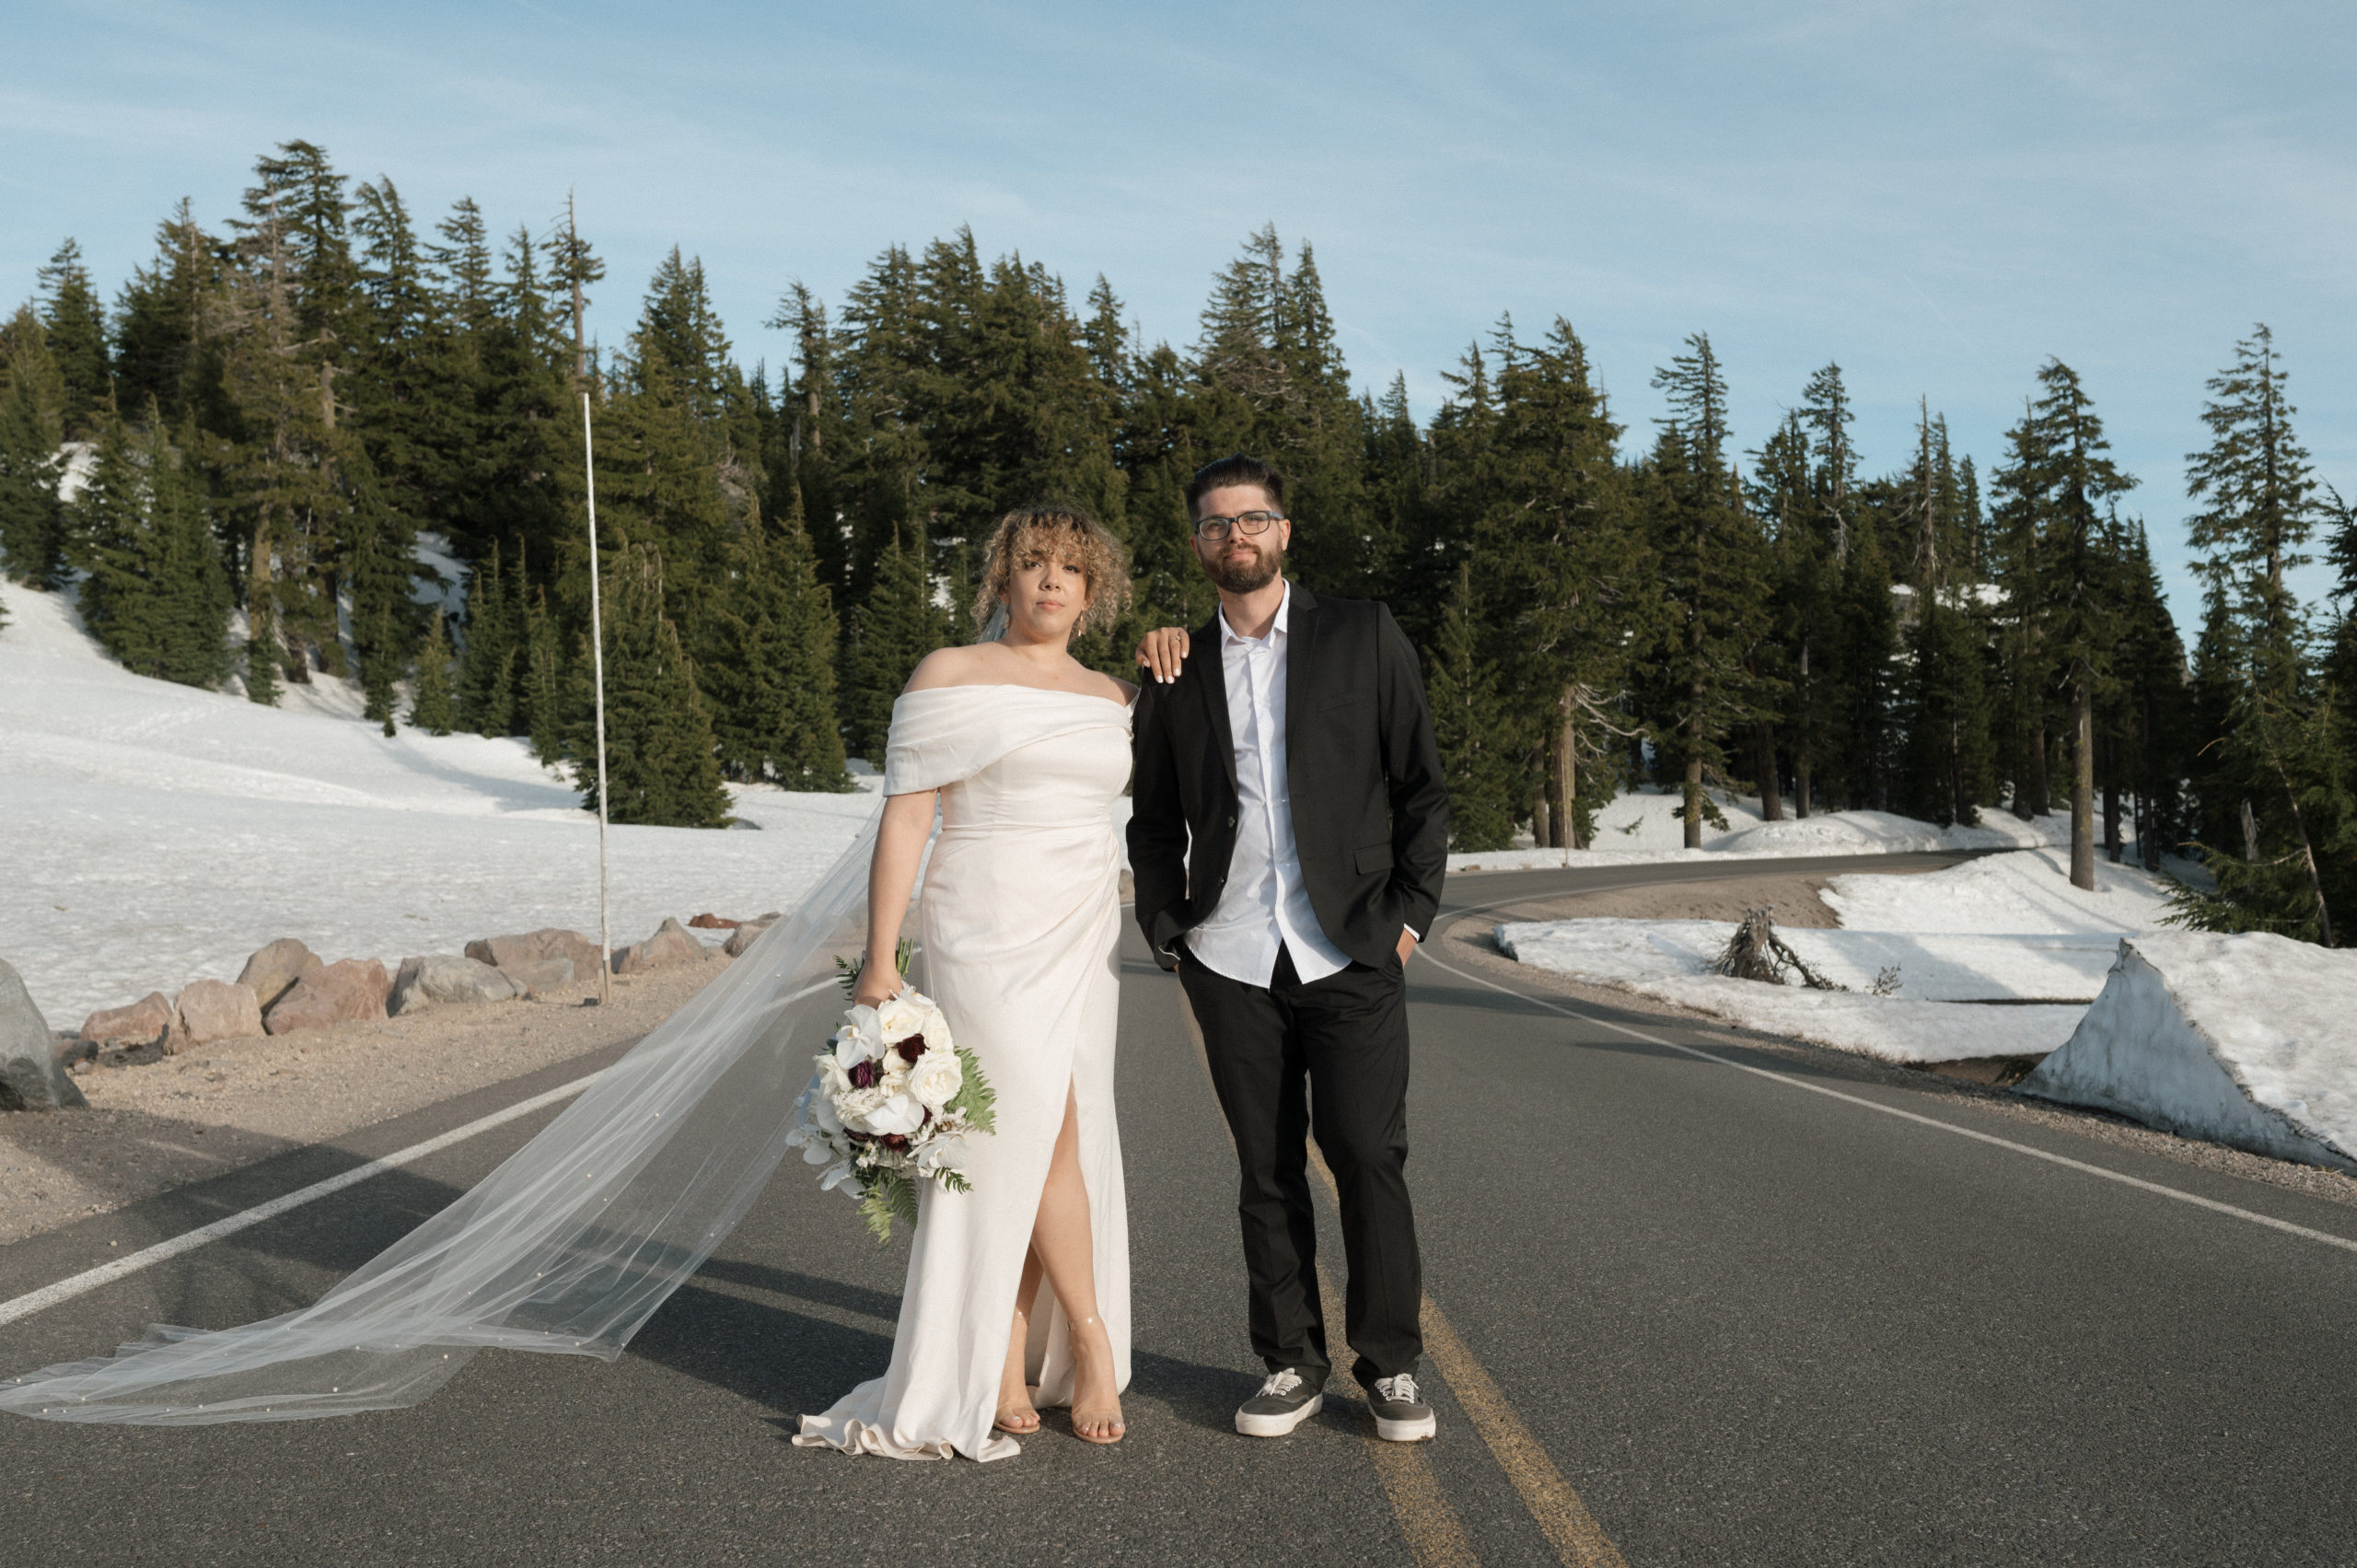 Crater Lake National Park Elopement Photographer in Oregon